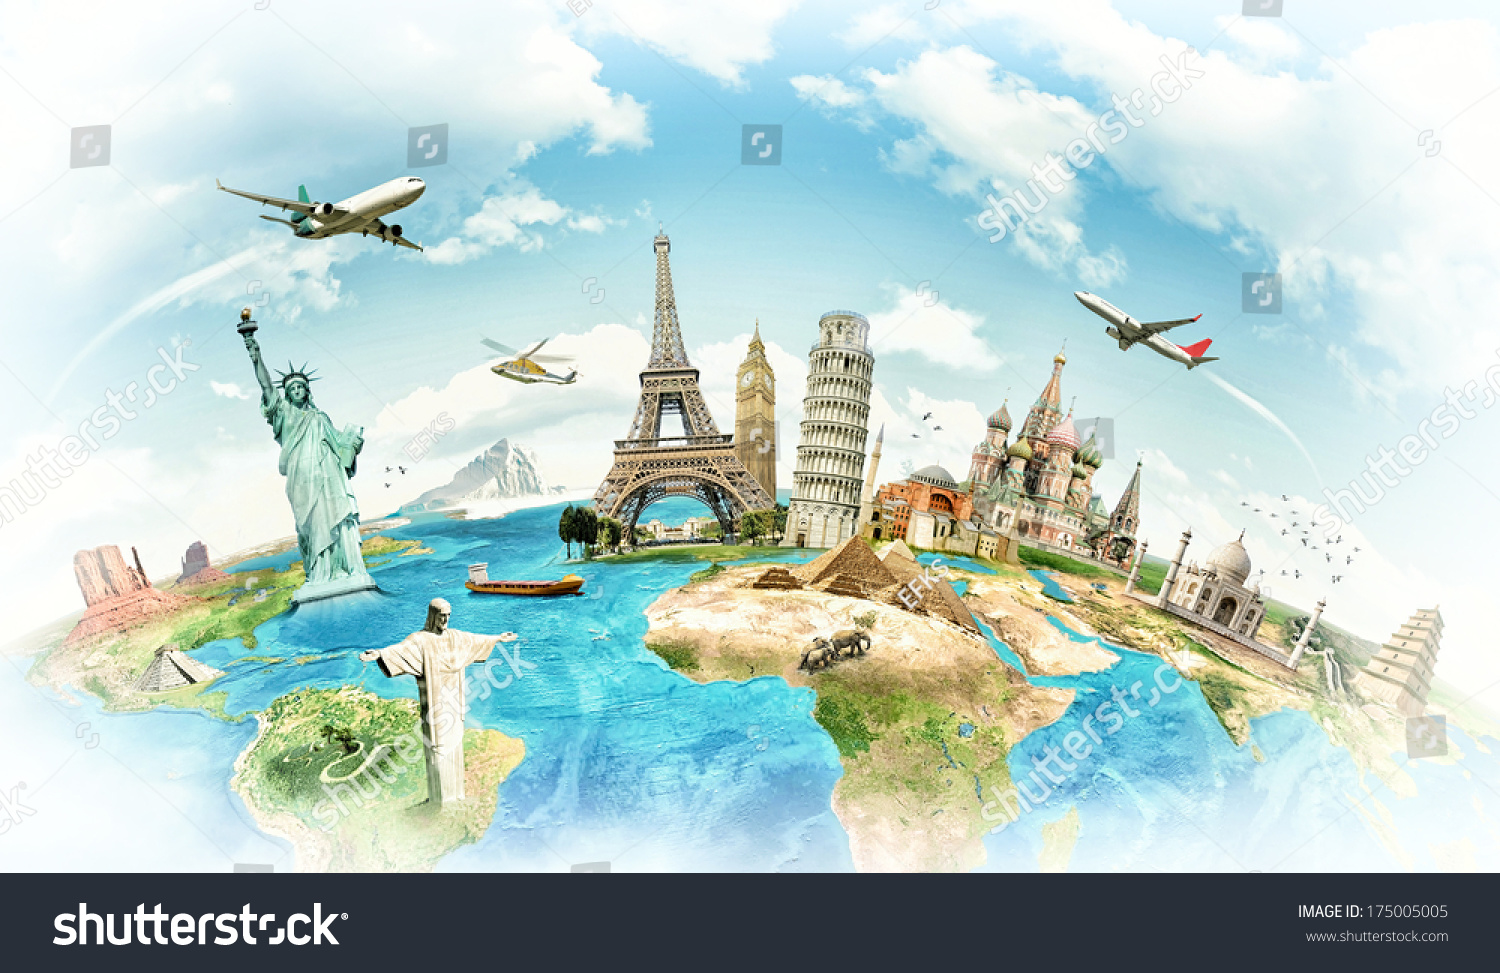 Travel The World Monument Concept Stock Photo 175005005 : Shutterstock